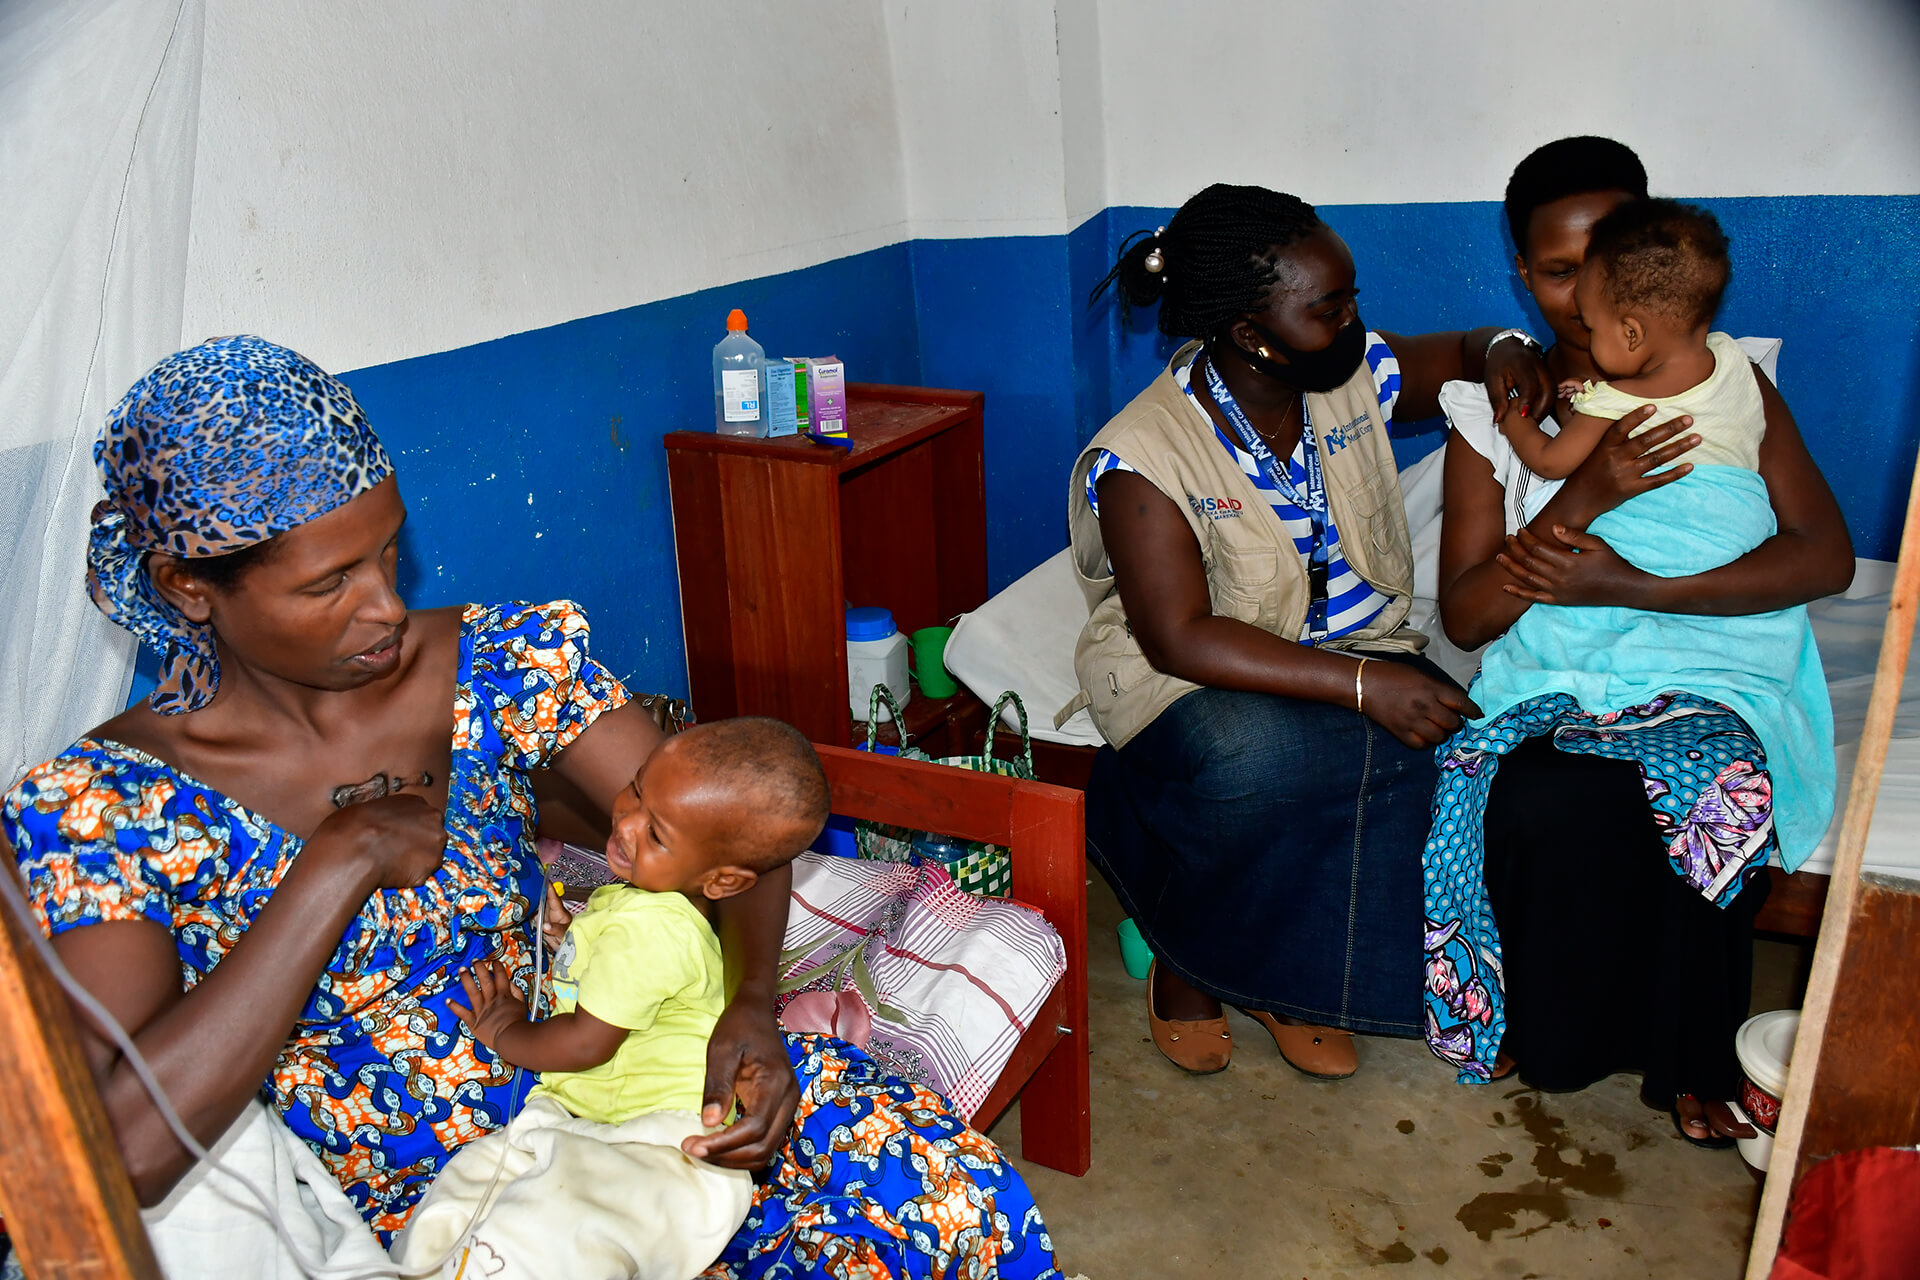 Nyamasoso Dyna (at left), an IDP in Uvira, holds her child while International Medical Corps staff member Melissa visits another mother to monitor the quality of care provided to war-displaced people.